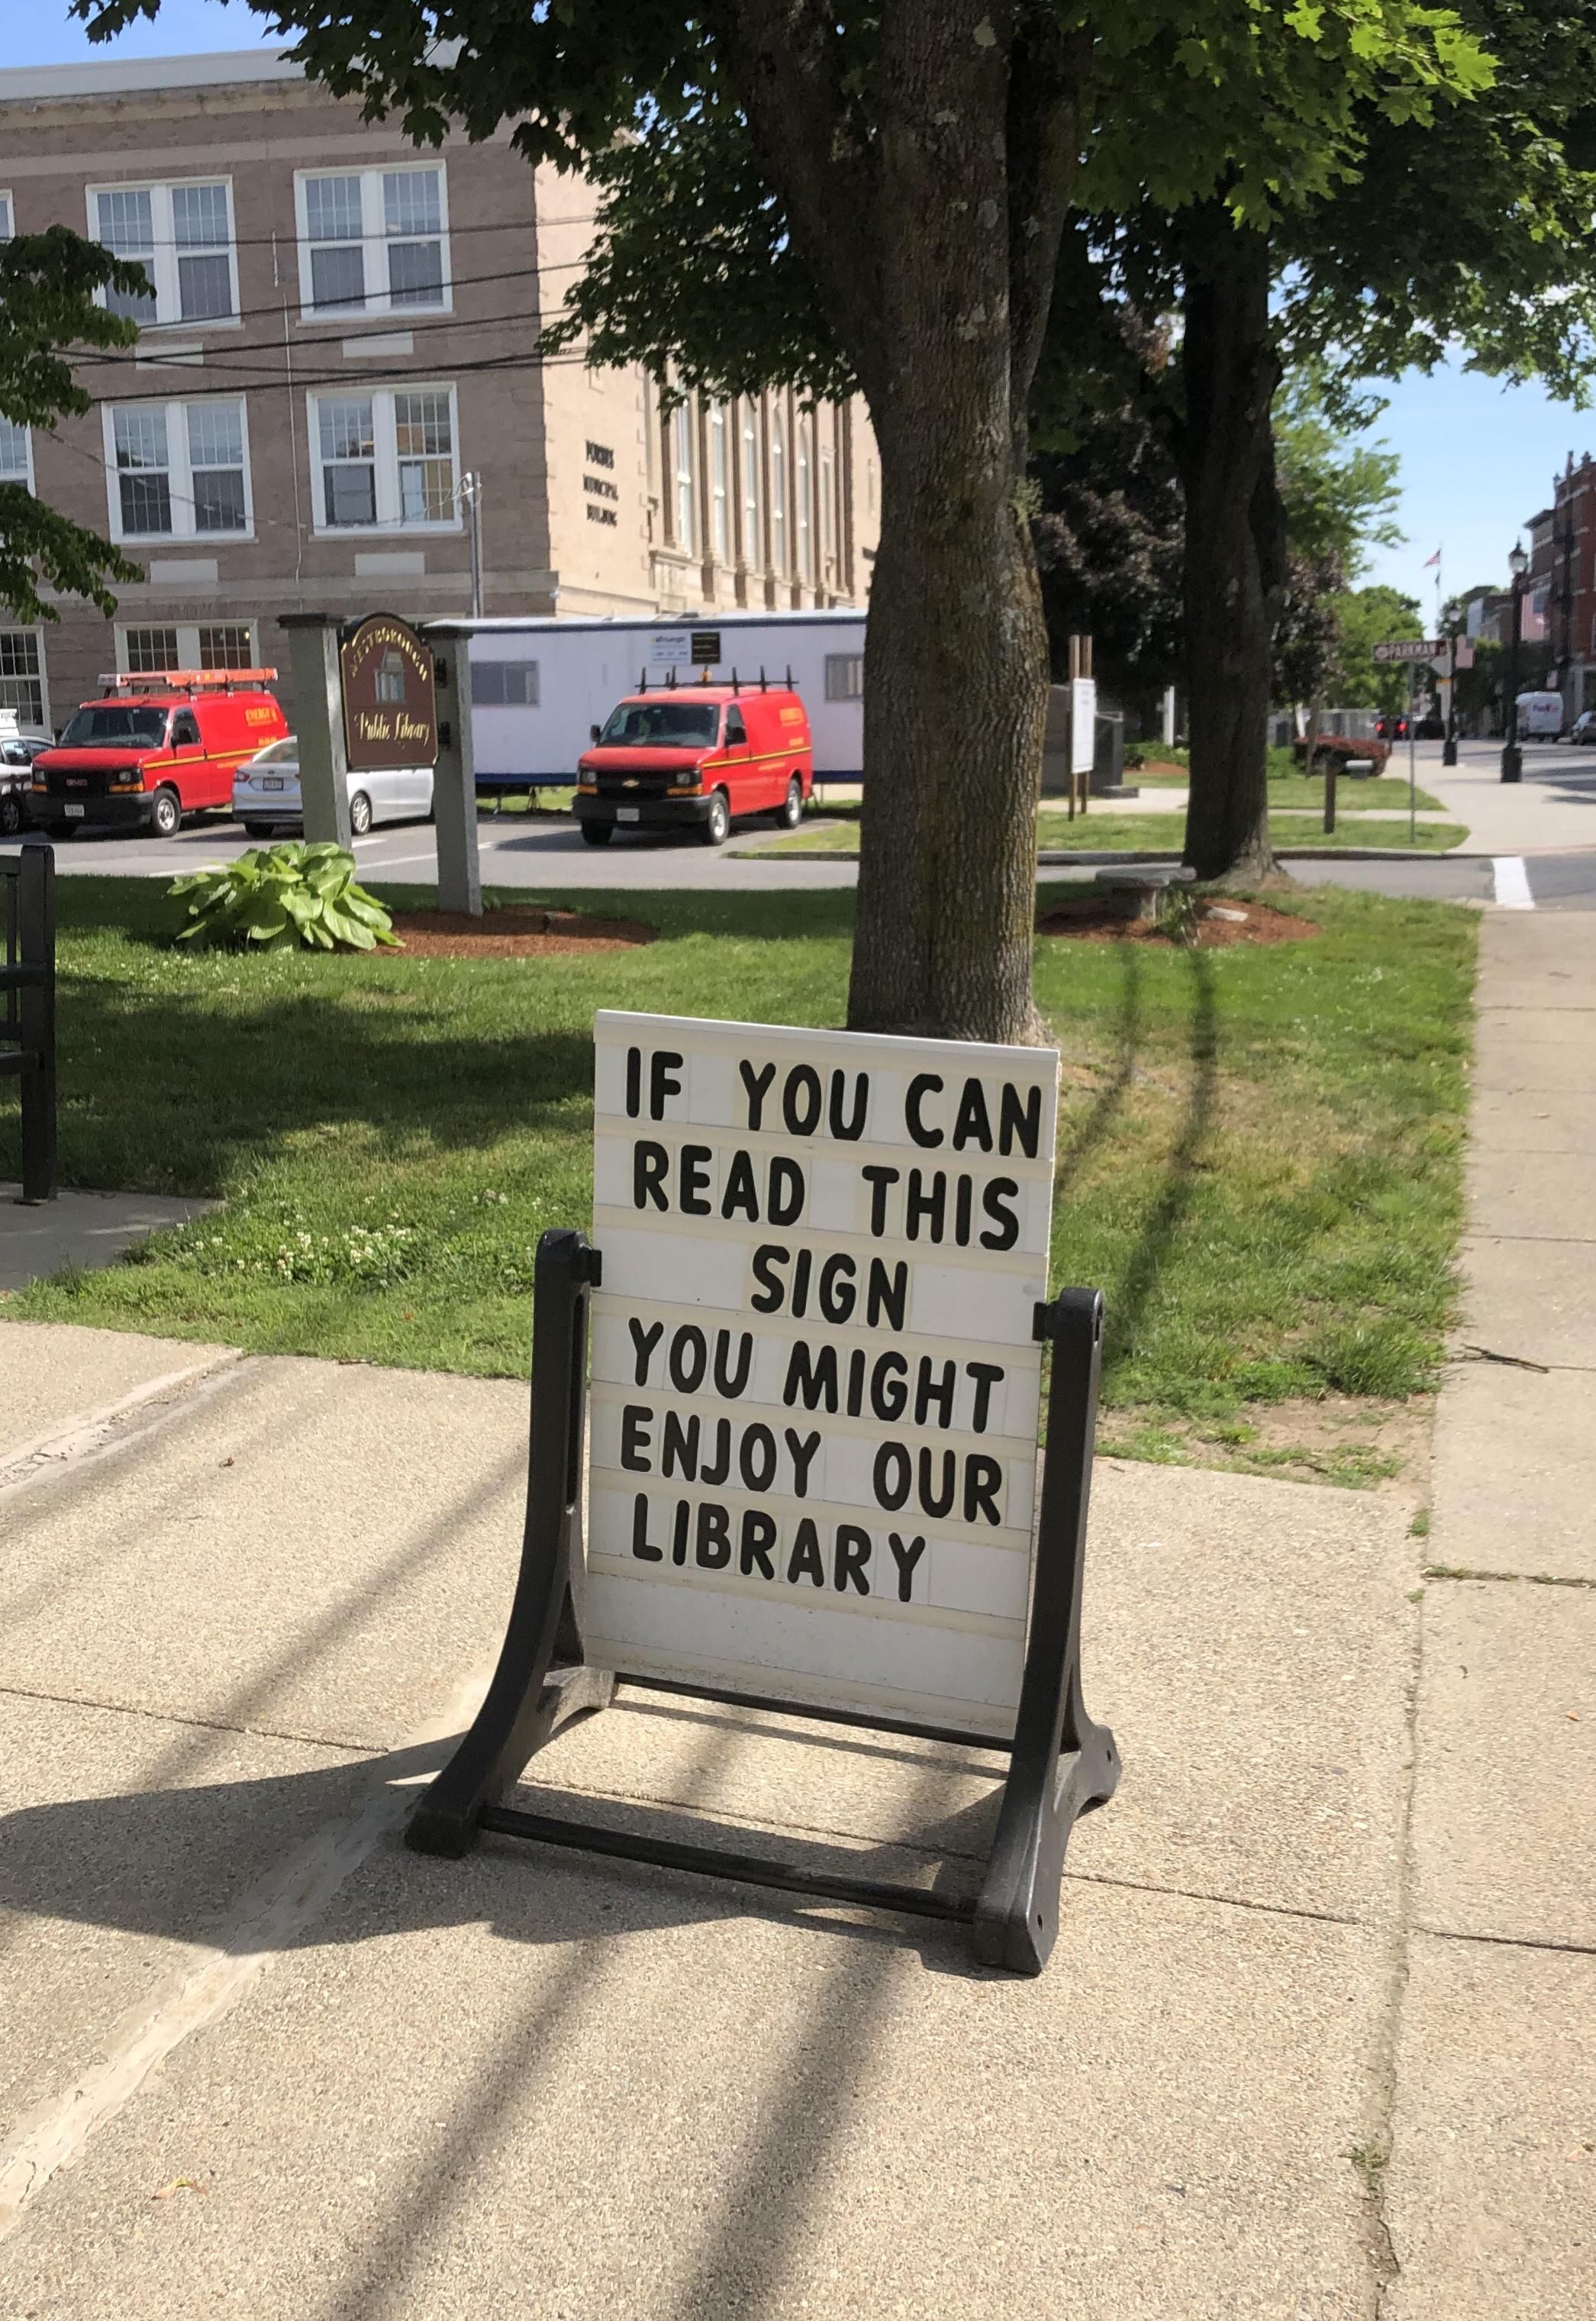 The library in my town put this outside. They are not wrong...